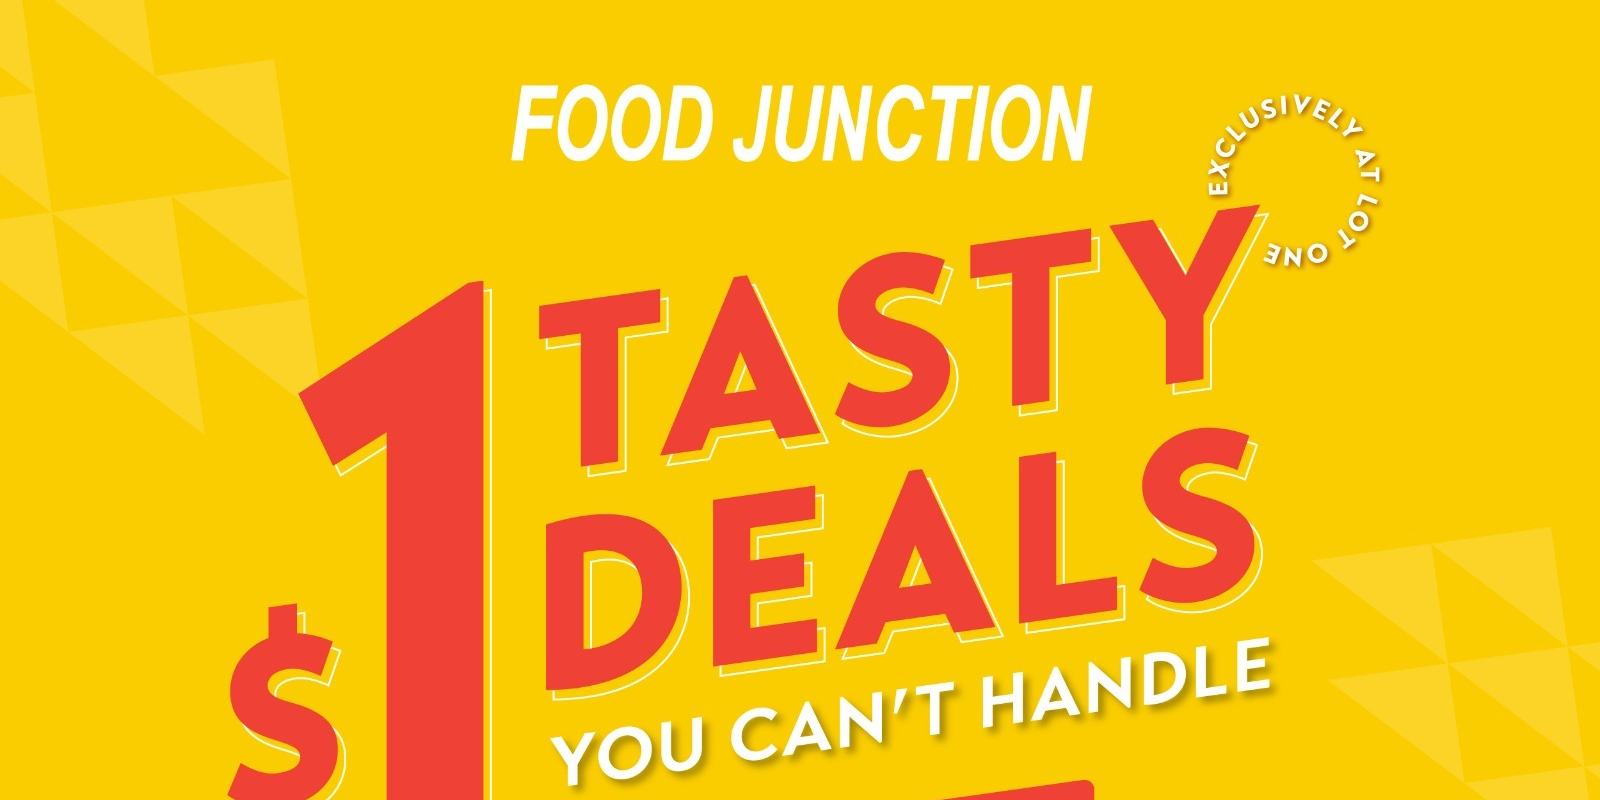 [$1 Promo Alert] Enjoy $1 deals from 1 Aug to 20 Aug only at Food Junction @ Lot One!